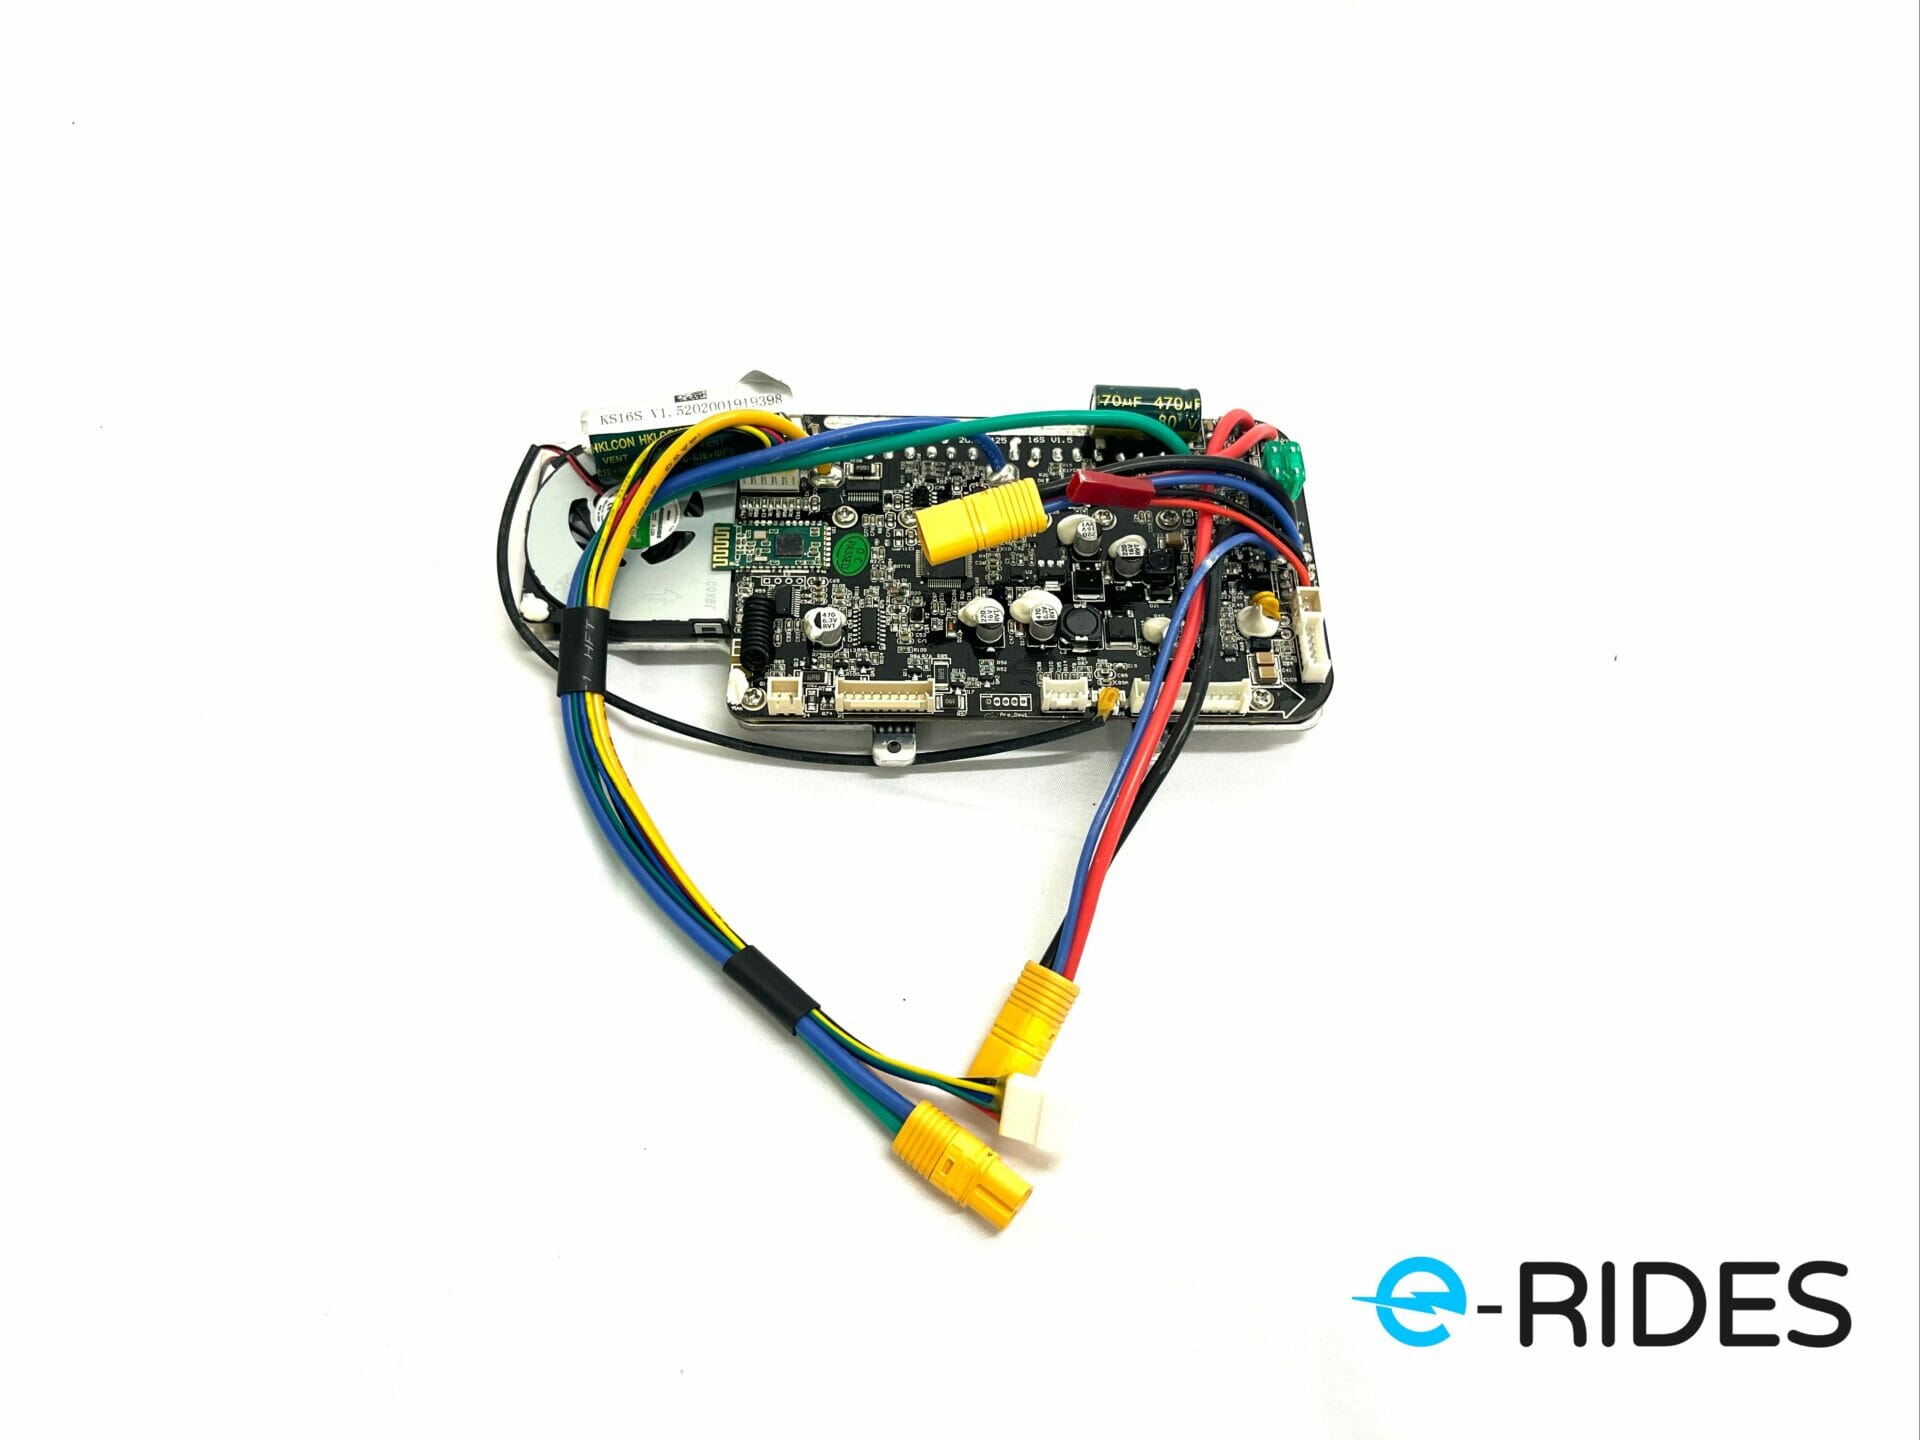 Kingsong 16S Electric Unicycle Control board (Mainboard)